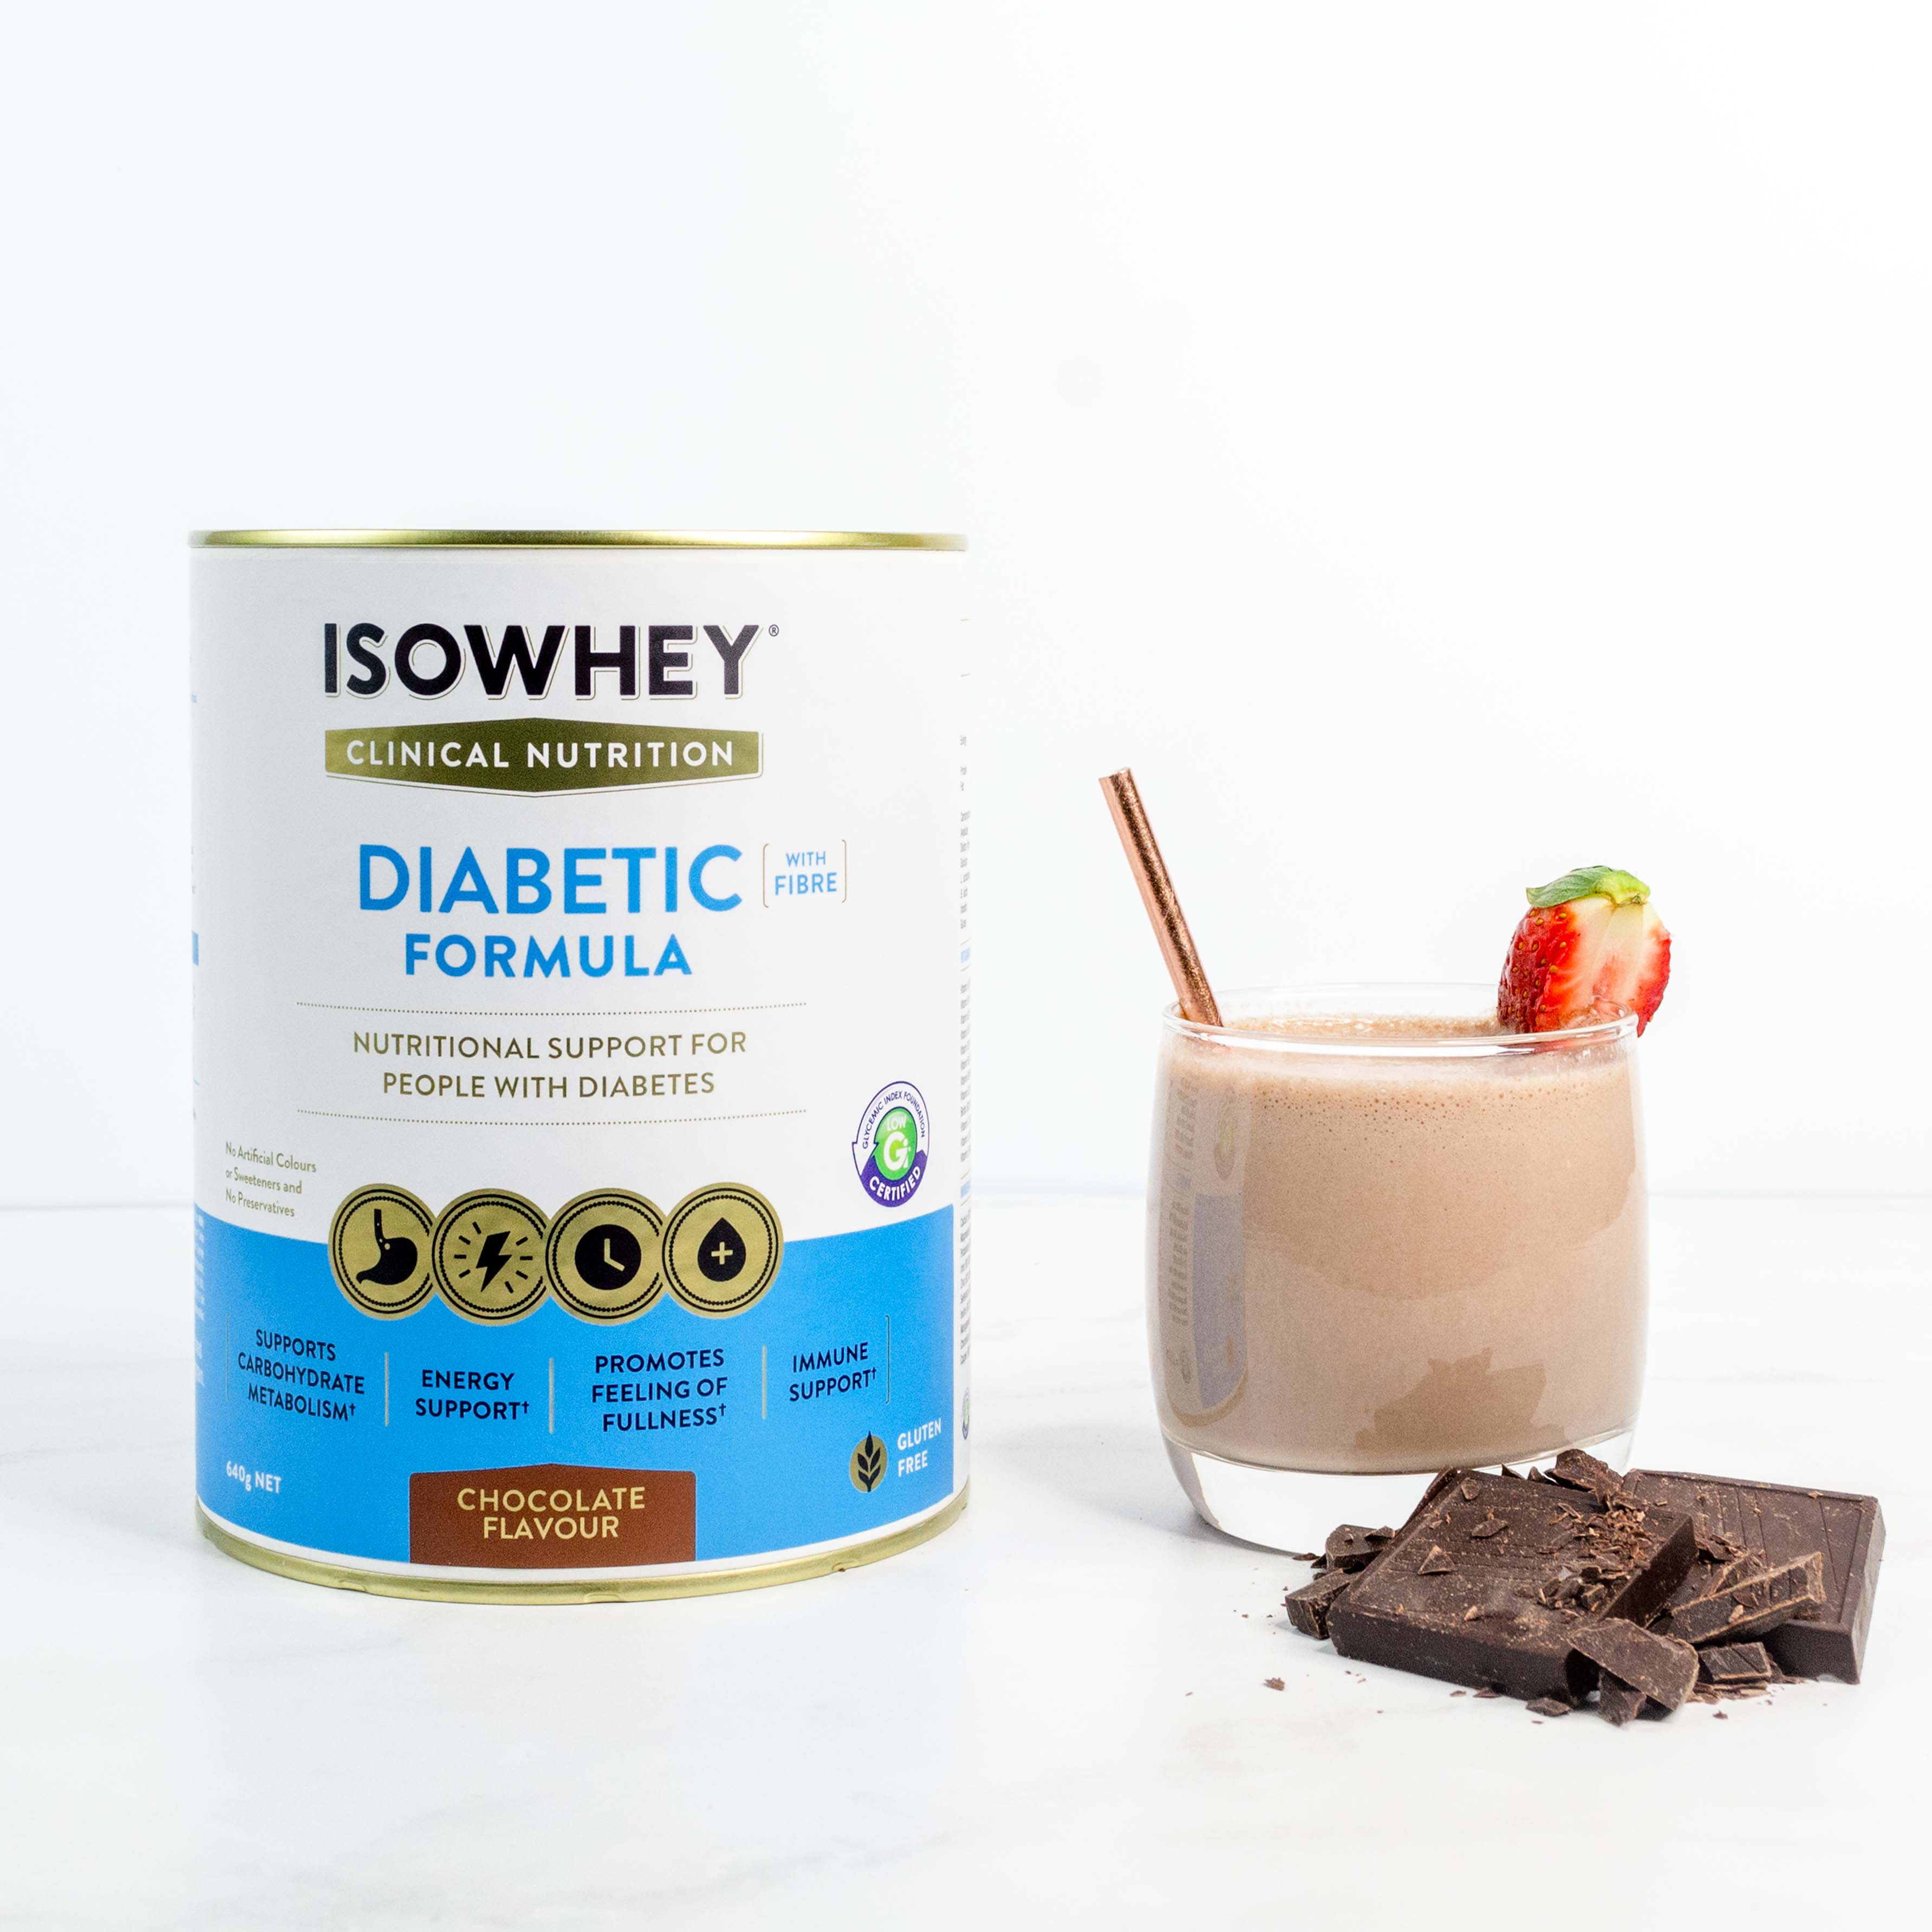 IsoWhey Clinical Nutrition Diabetic Formula Chocolate for healthy and balanced diet